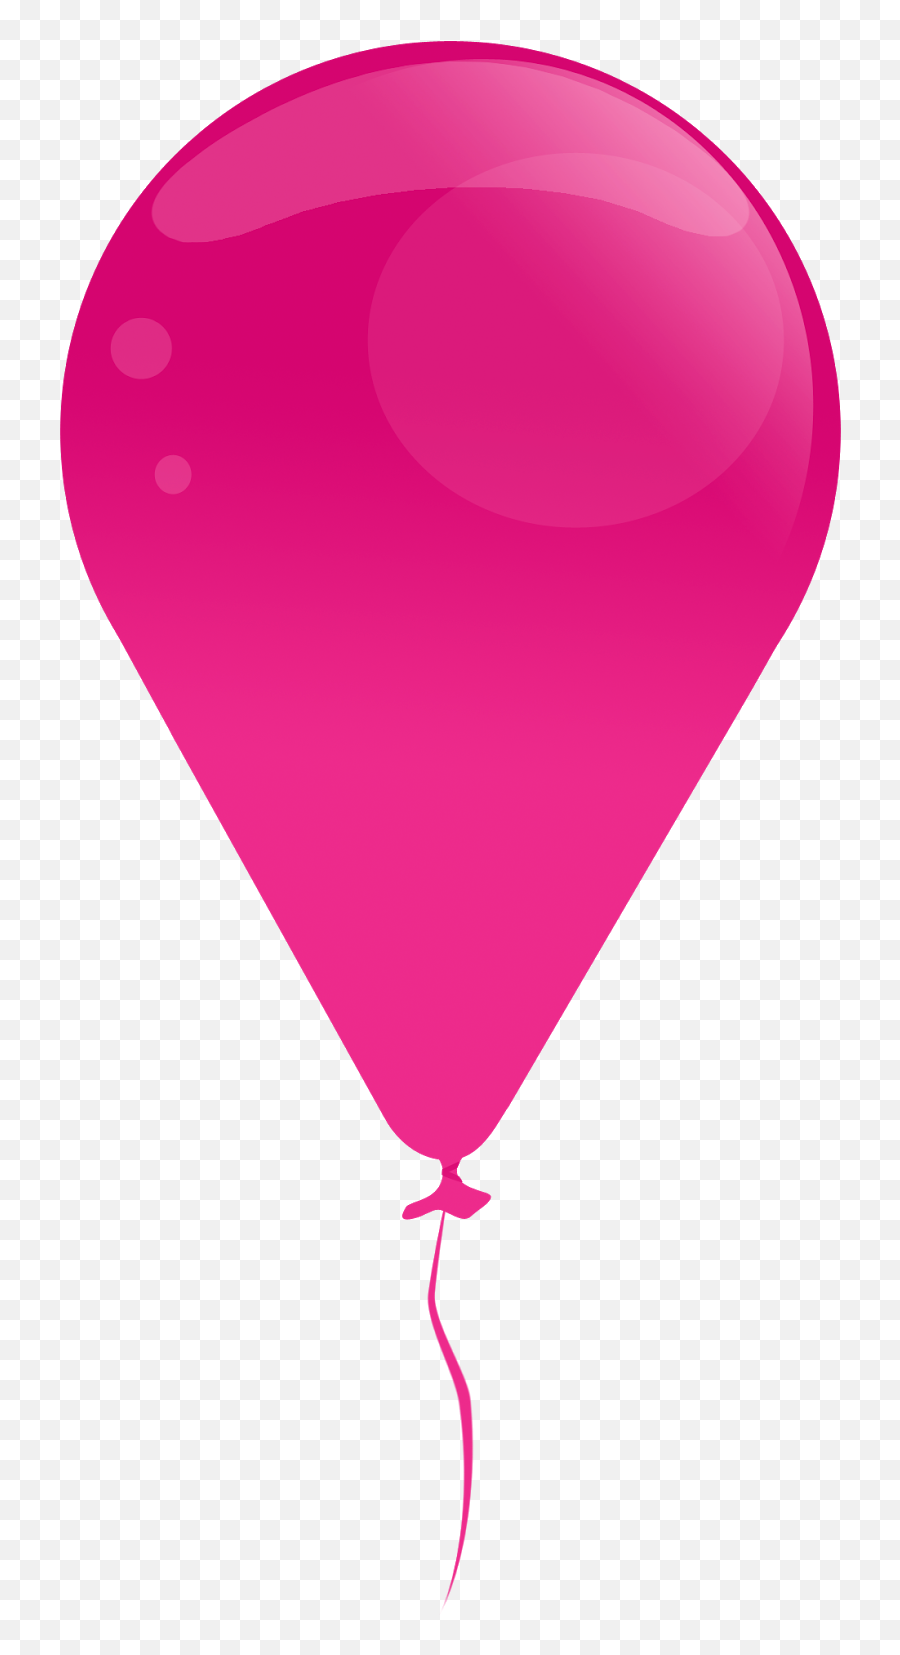 Download Pink Balloon Clipart Png Transparent - Uokplrs Pink Balloon Clip Art,Balloons Clipart Transparent